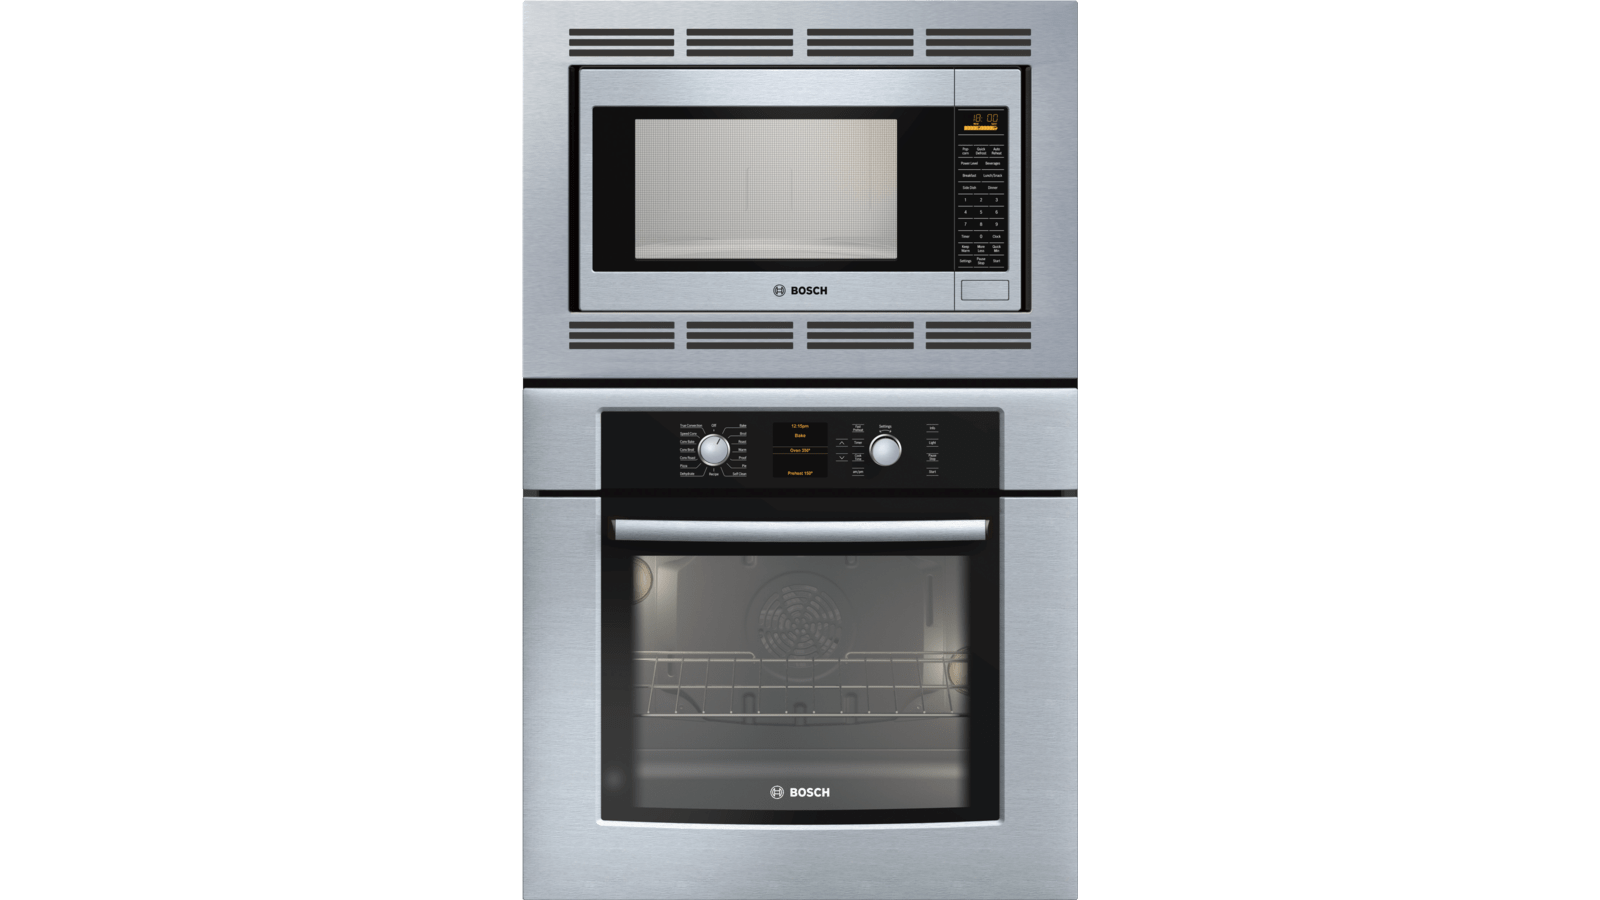 Bosch 30 Microwave Combination Oven 500 Series - Stainless Steel - HBL57M52UC